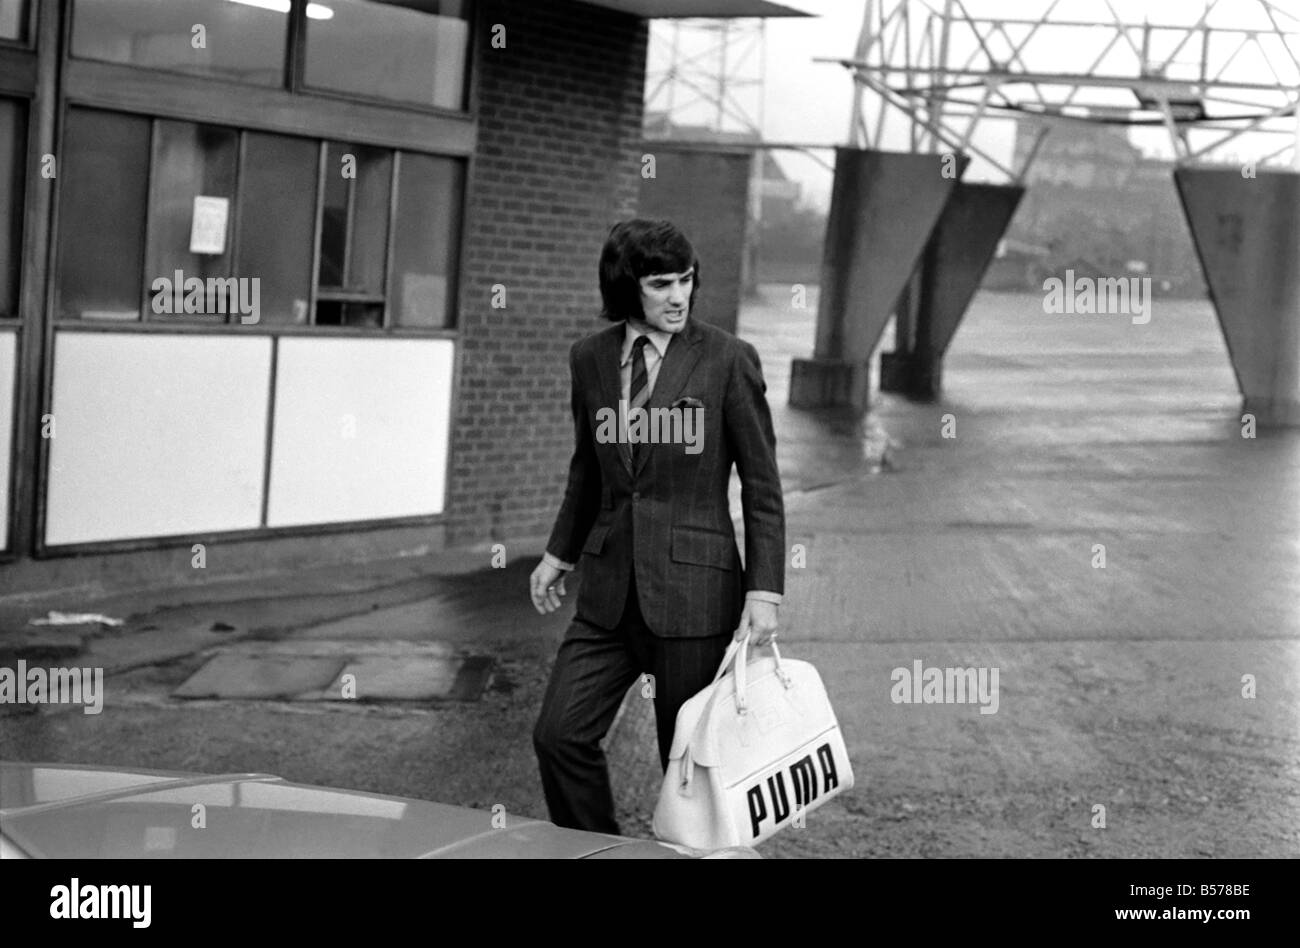 George Best right as he left Old Trafford ground to board the coach on route to Ipswich he had just been suspended and fined. January 1970 70-00102 Stock Photo